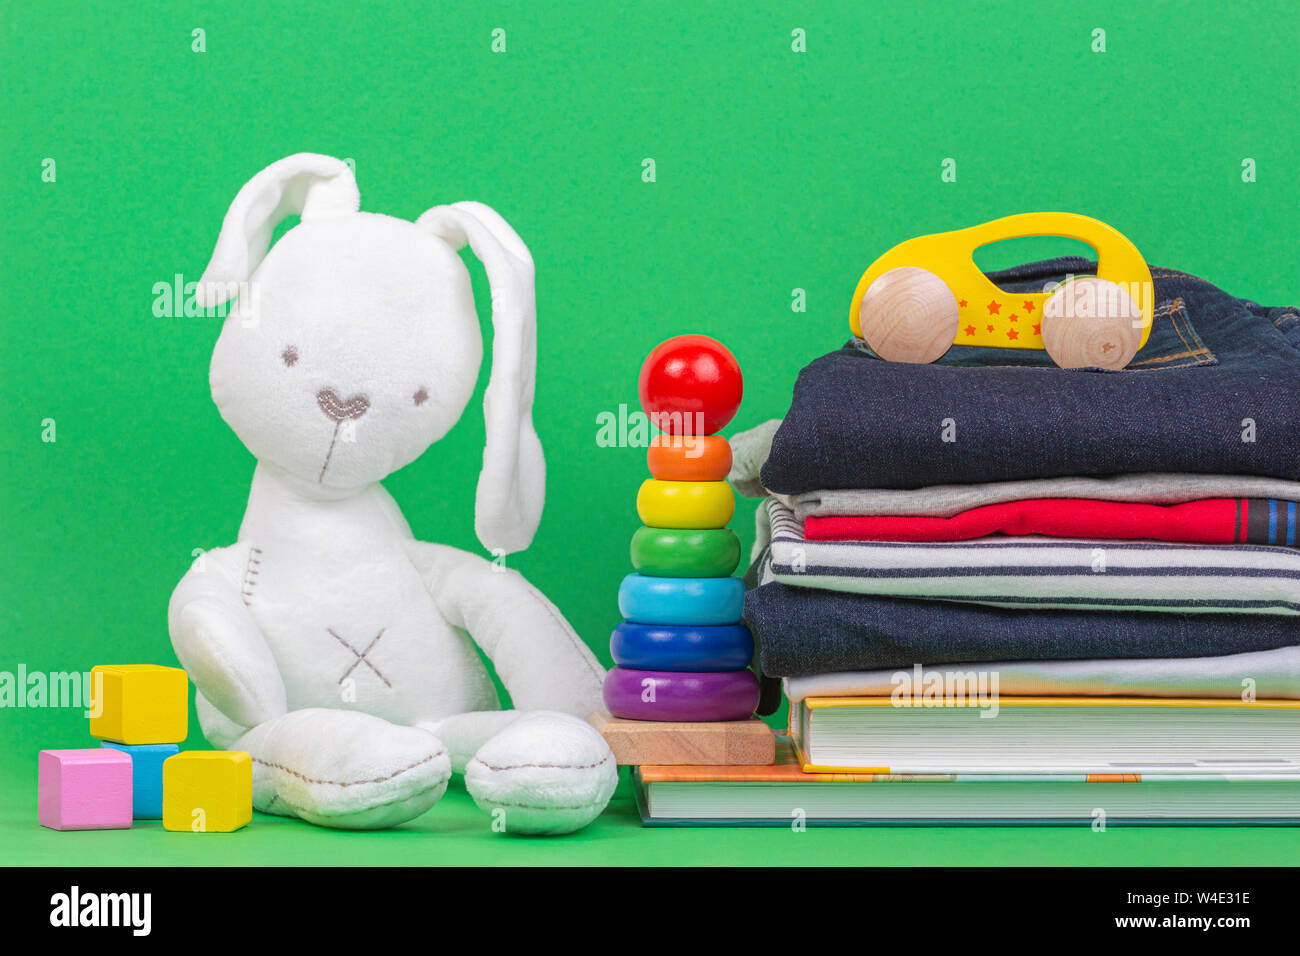 Donation concept. Kid toys, books and clothes for donate or charity on green background Stock Photo